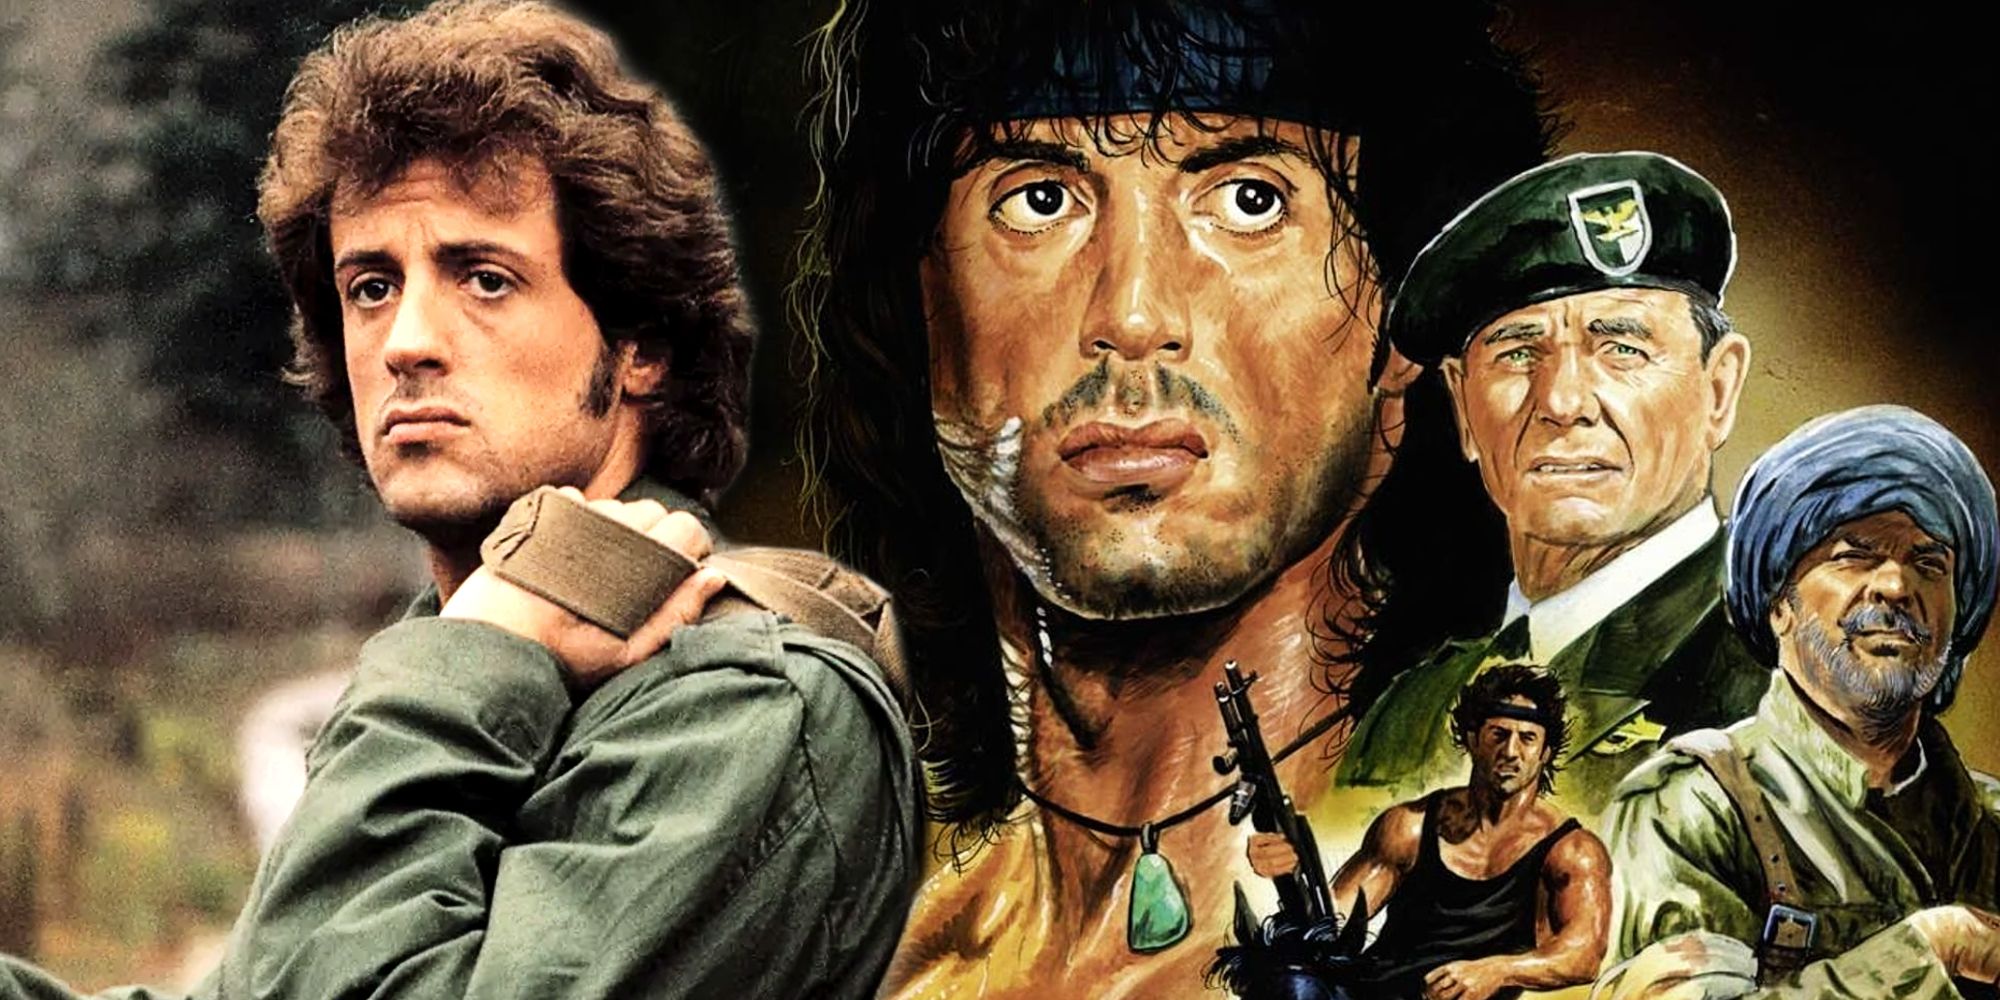 Sylvester Stallone as Rambo in First Blood and Rambo 3